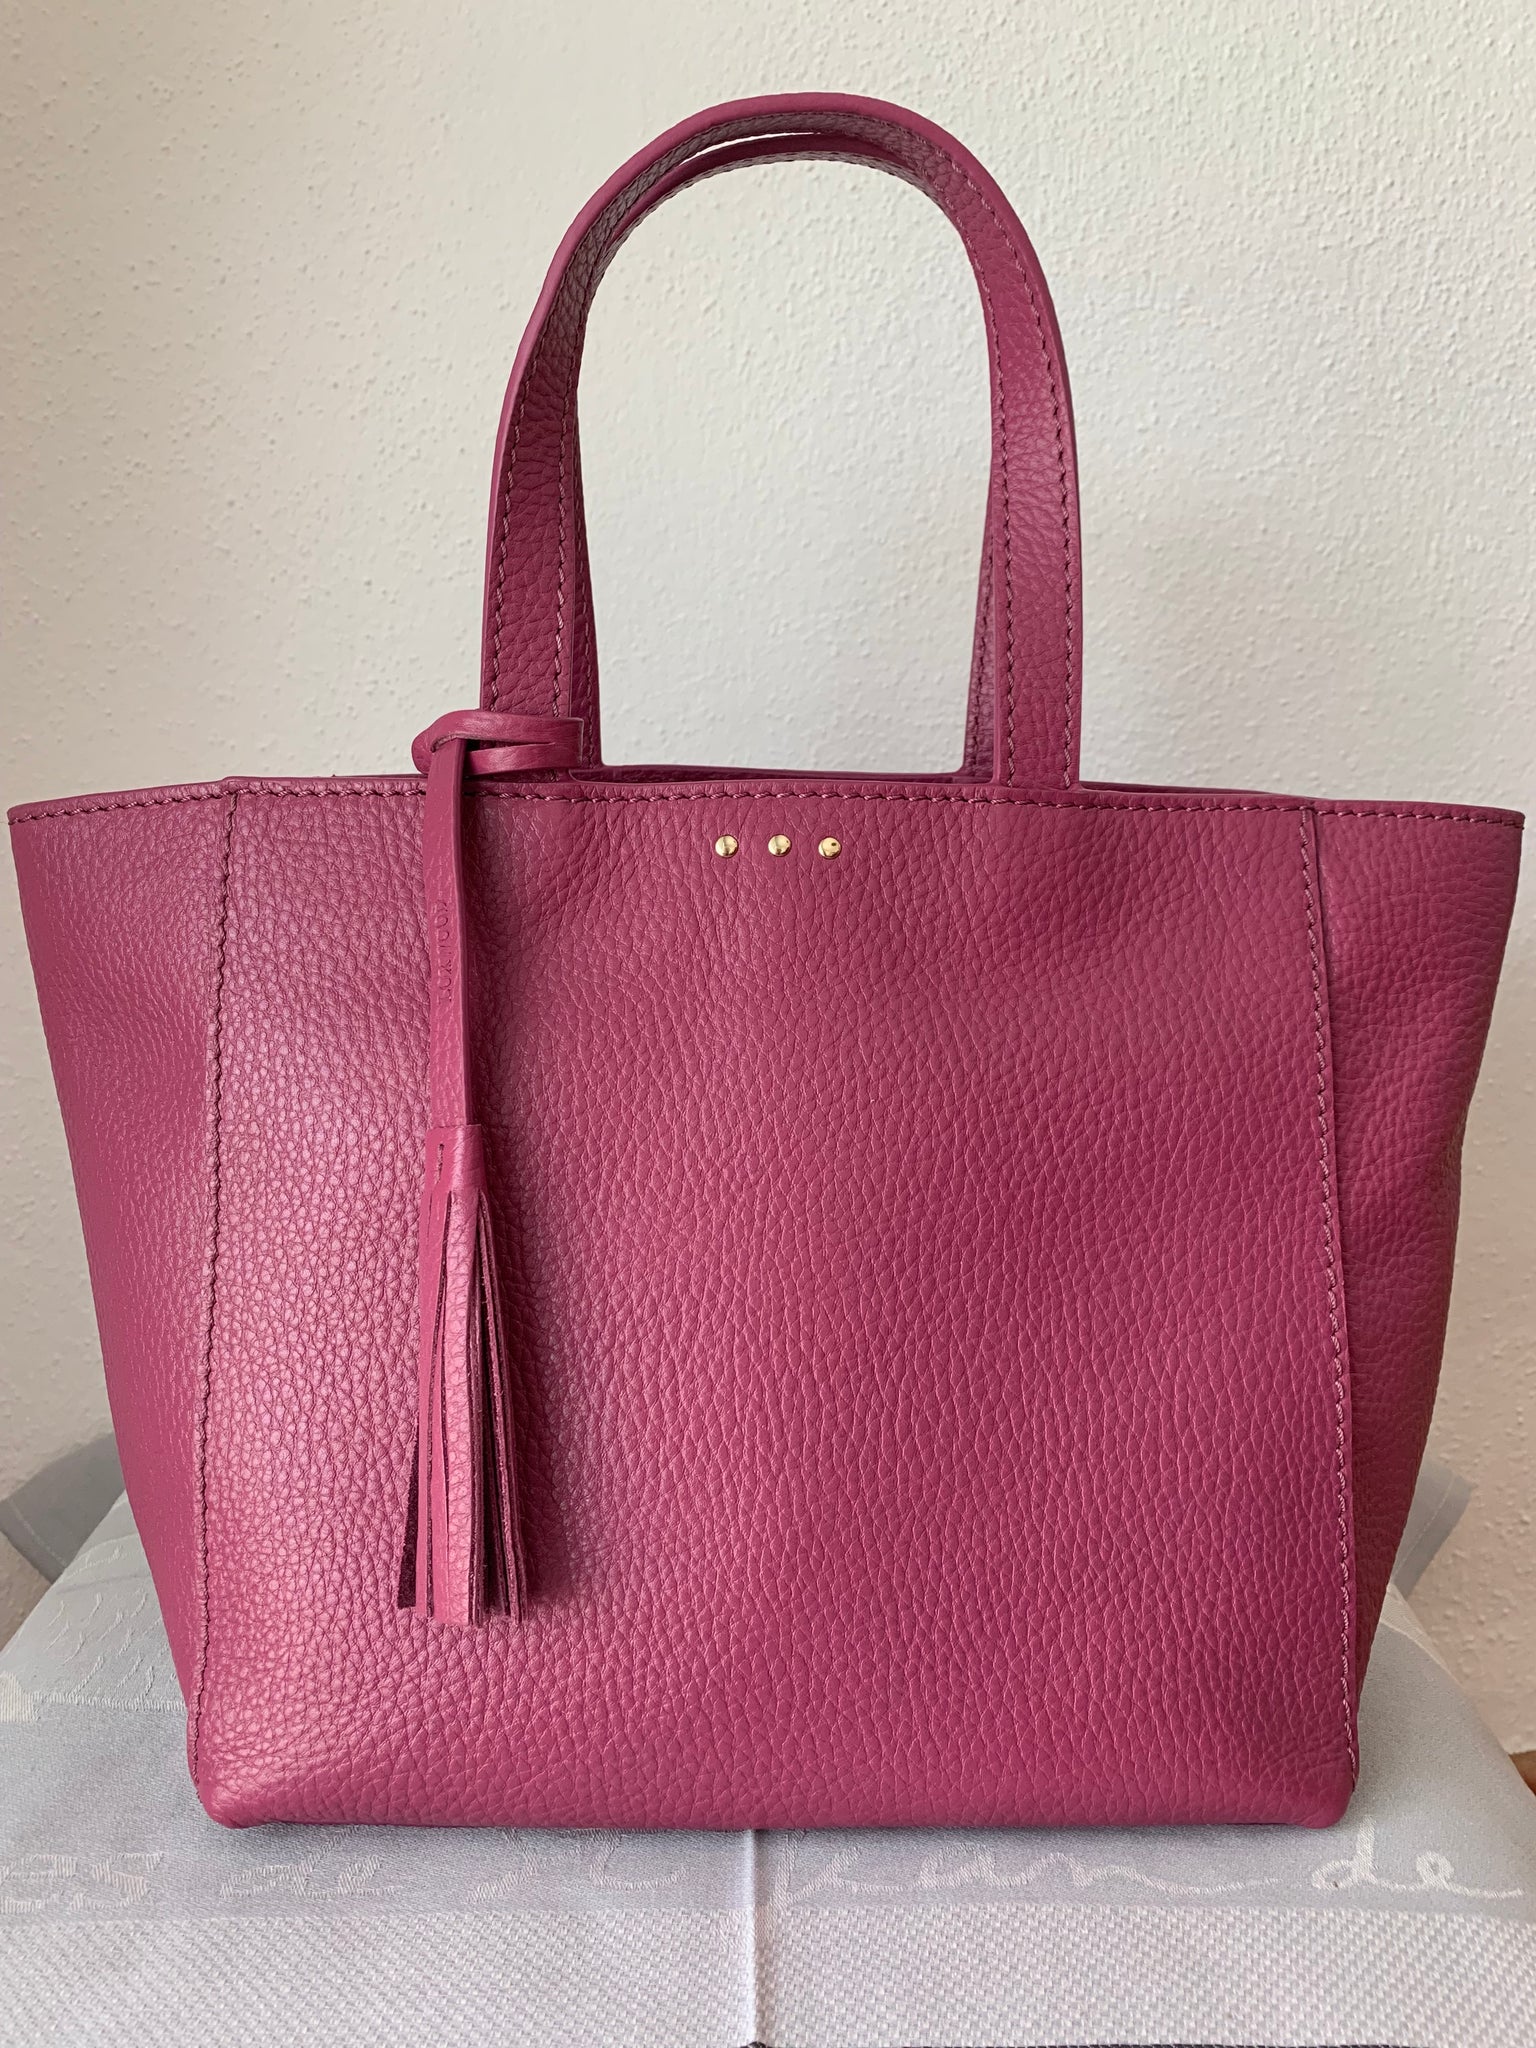 Small Shopper by Loxwood "le Cabas Parisien" in "Raspberry"